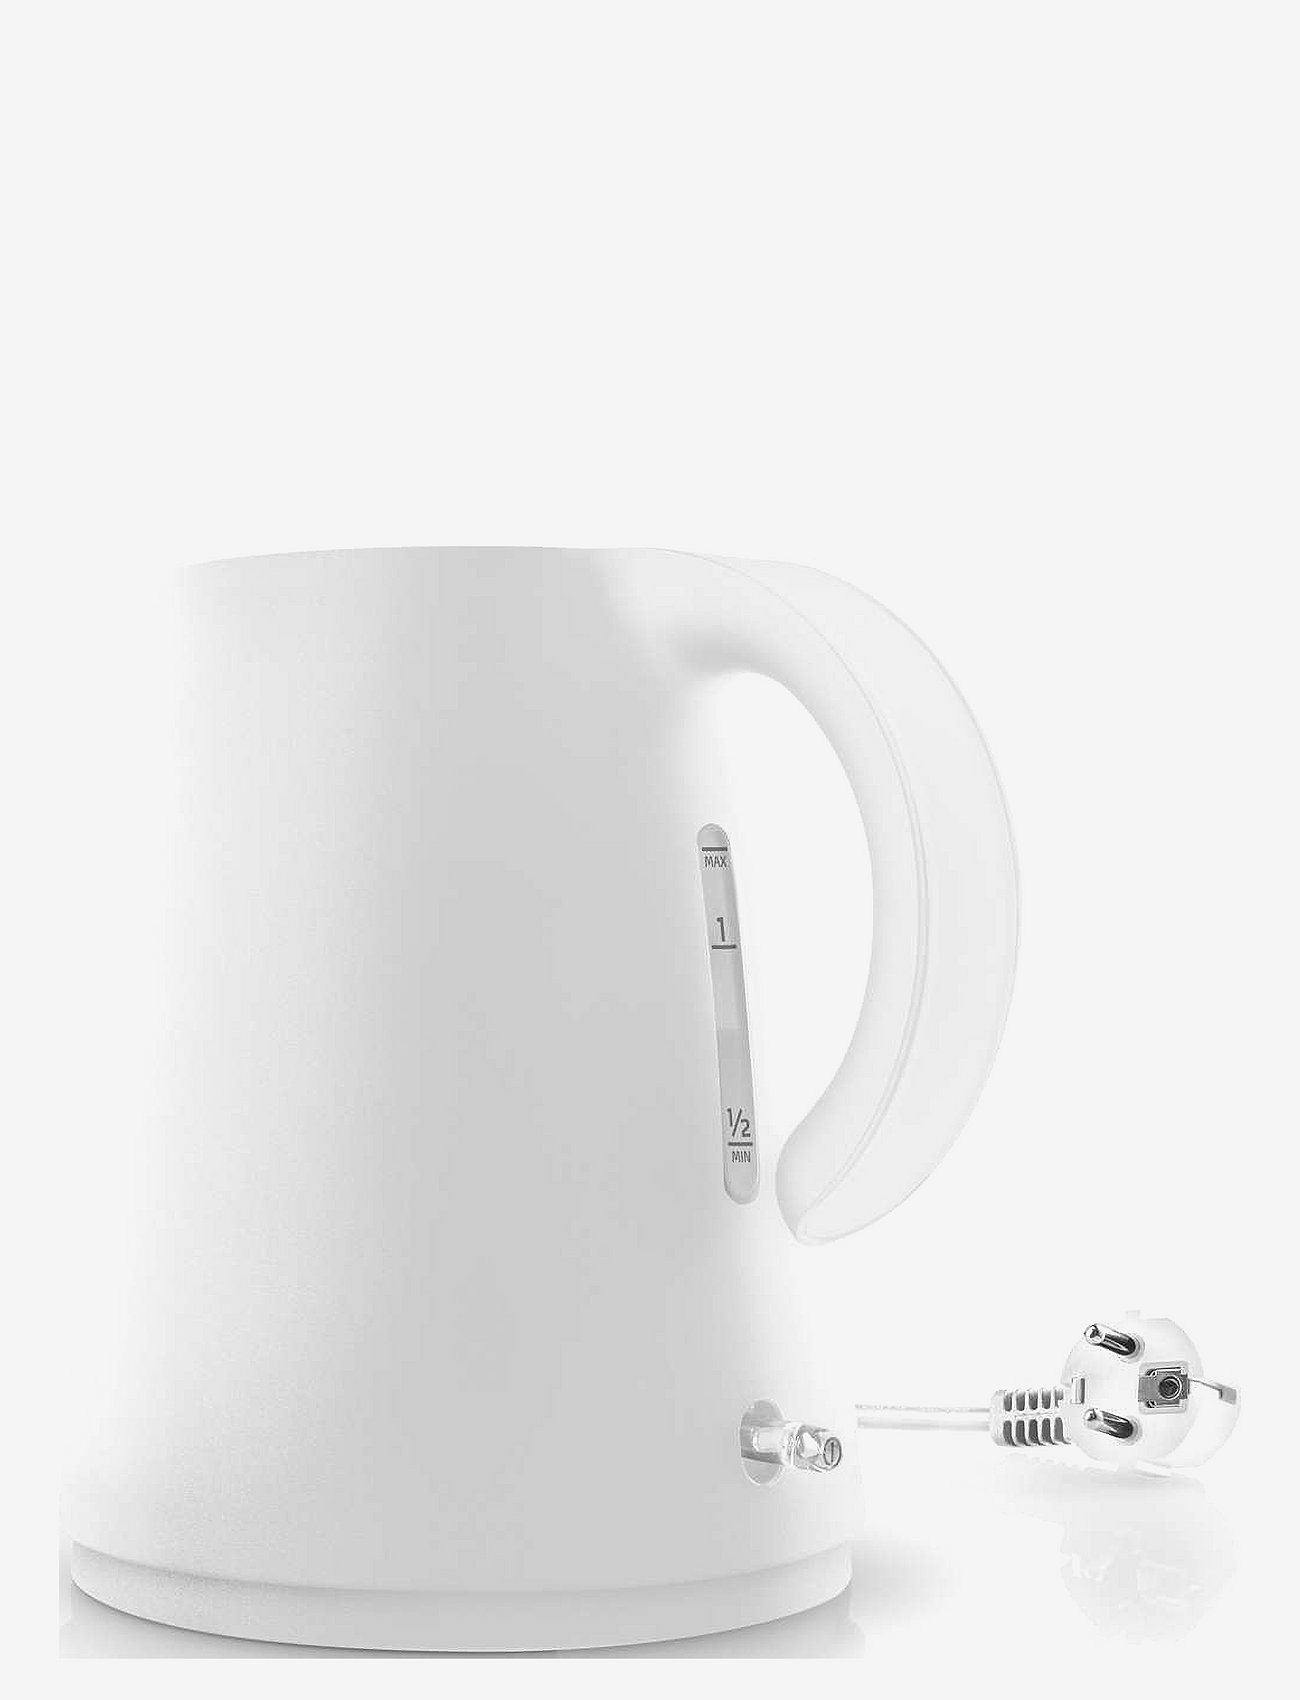 Eva Solo - Rise electric kettle 1.2l White - kettles & water boilers - white - 1